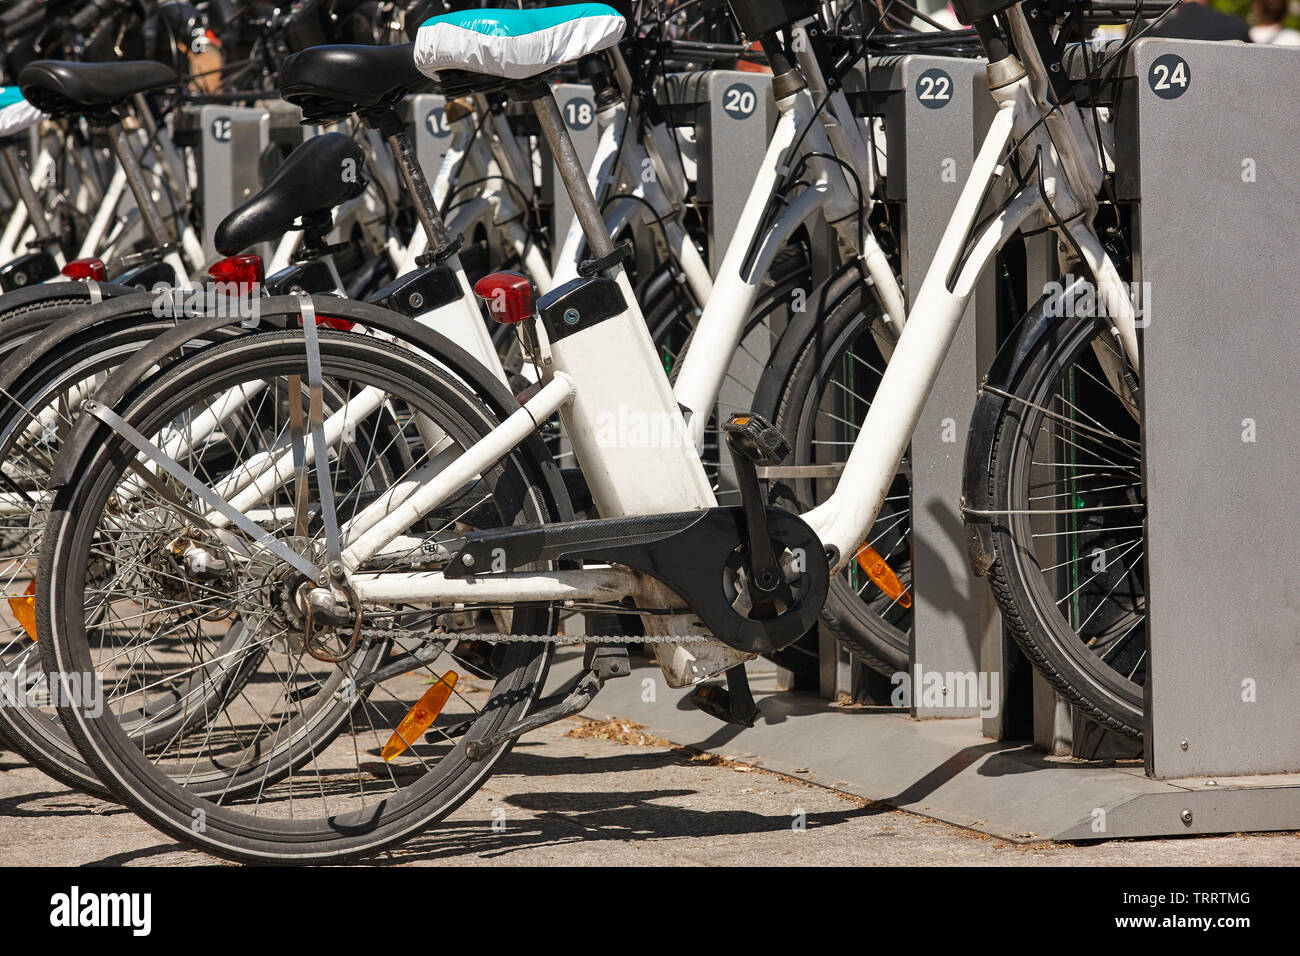 Sustainable Urban Mobility Bikes On The City Electric Transport Traffic Stock Photo Alamy